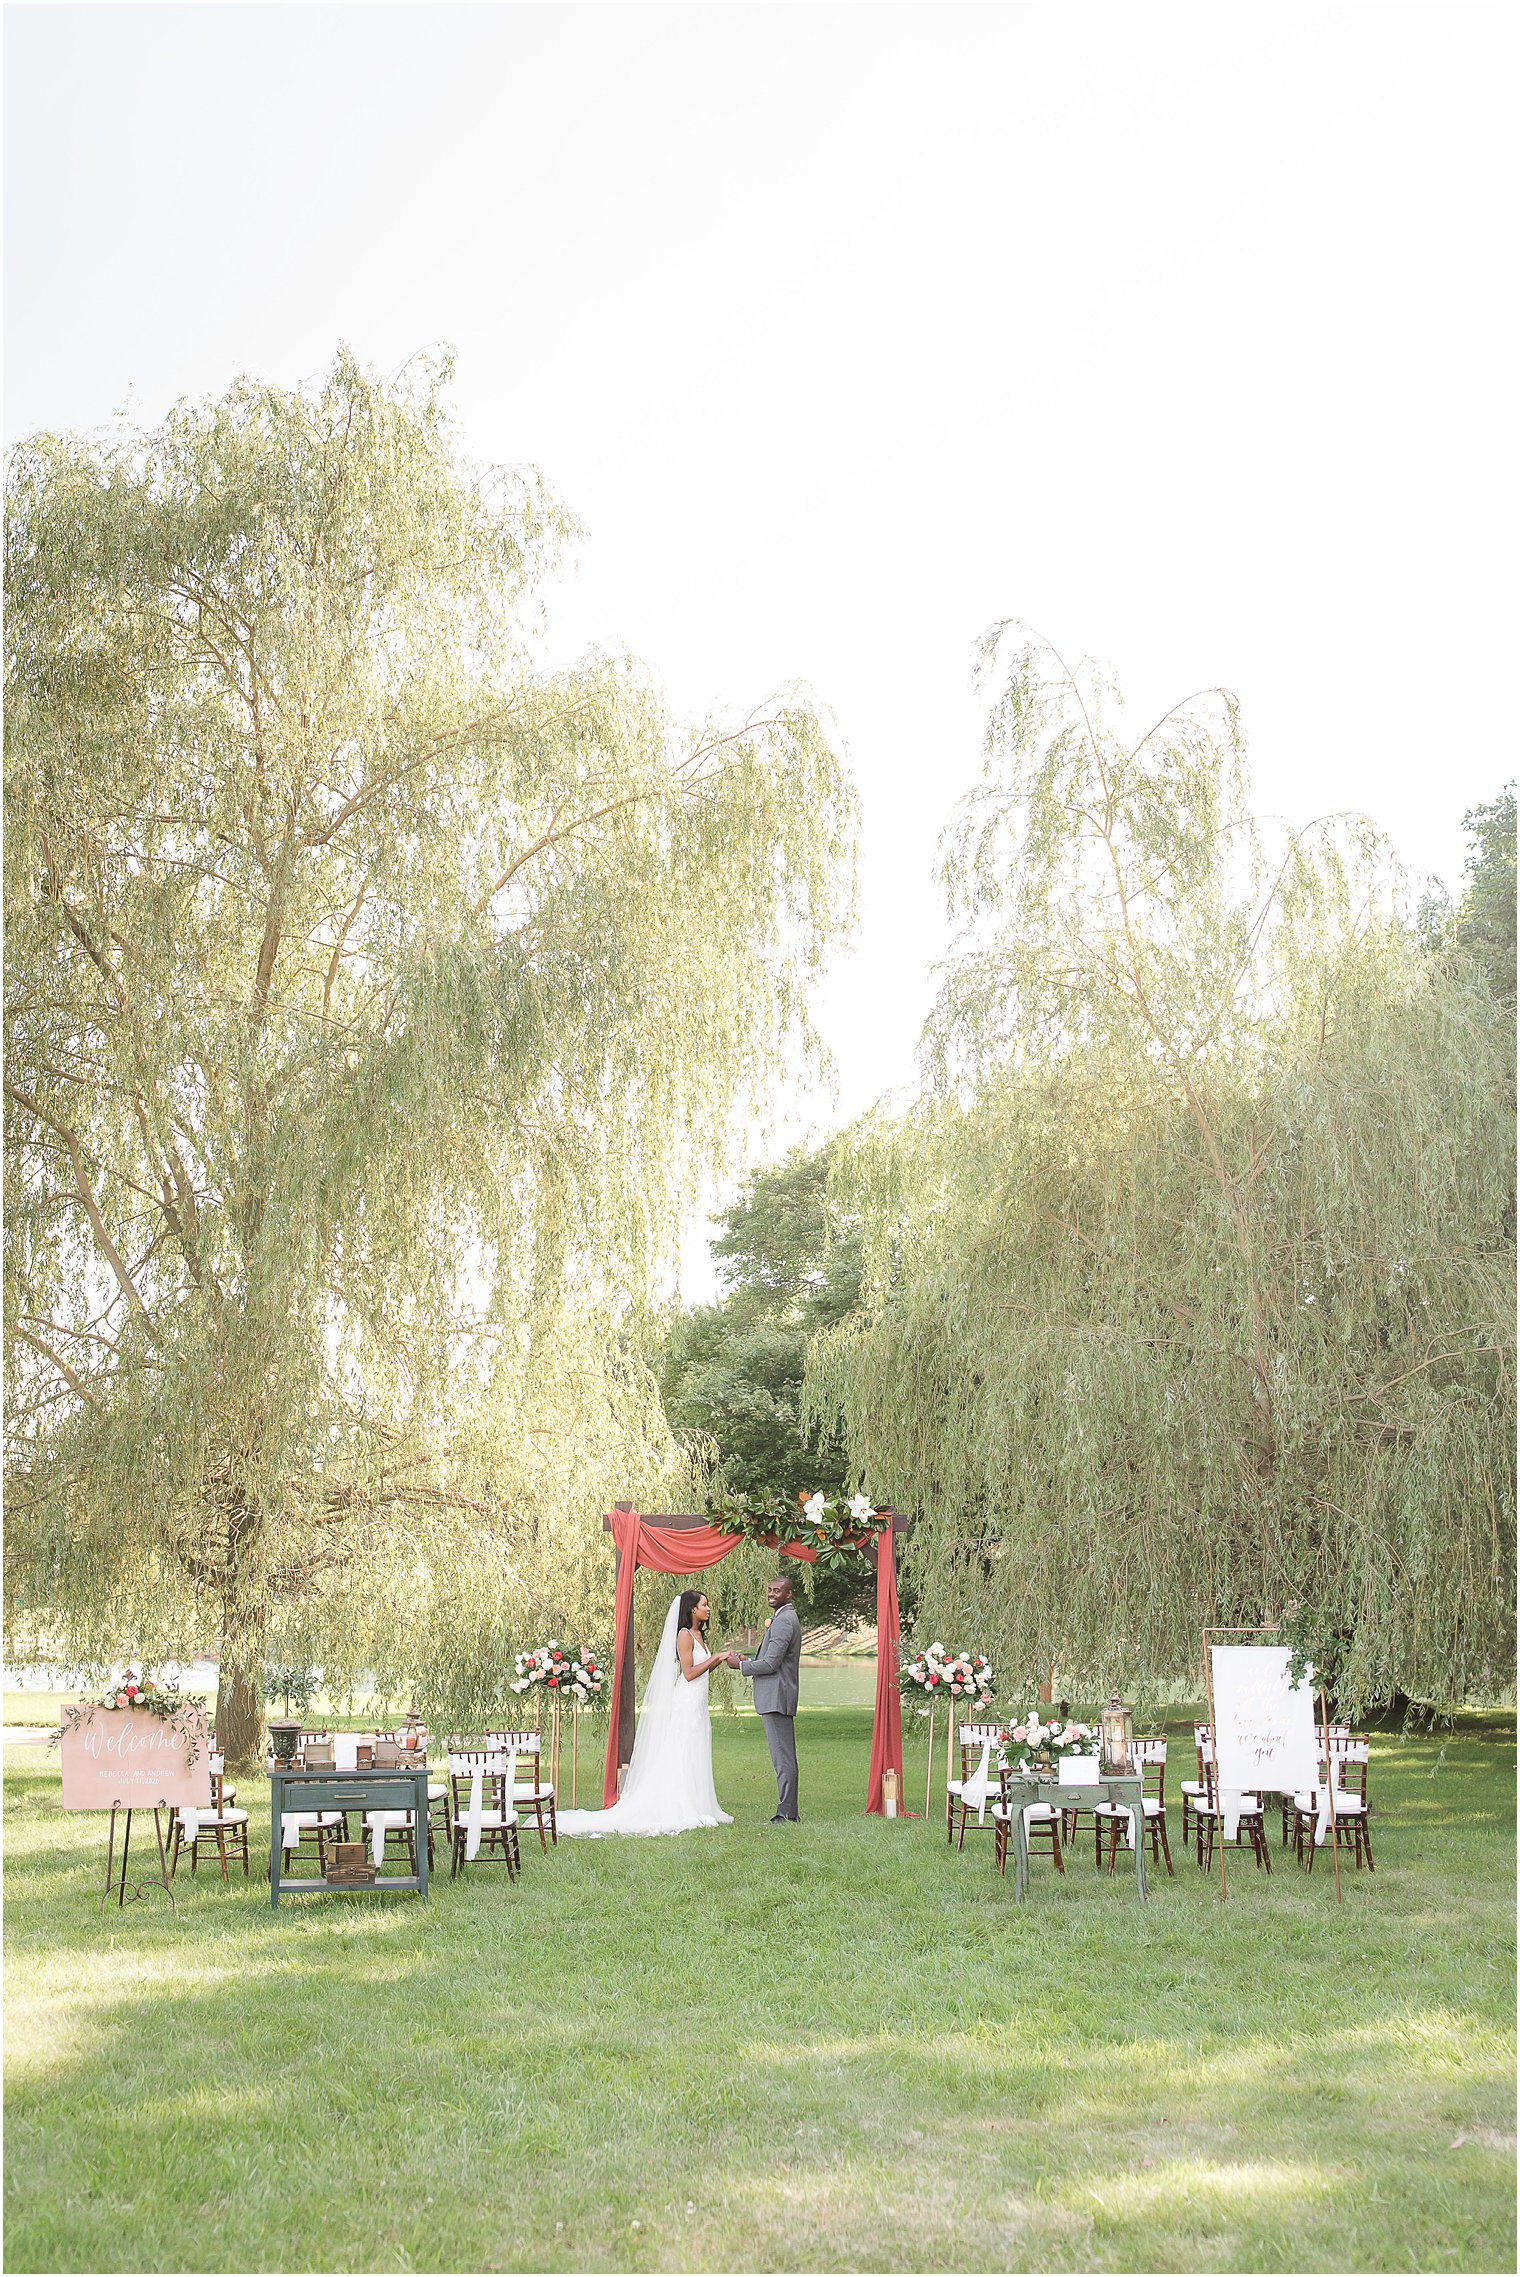 Windows on the Water at Frogbridge microwedding ceremony by willow tree